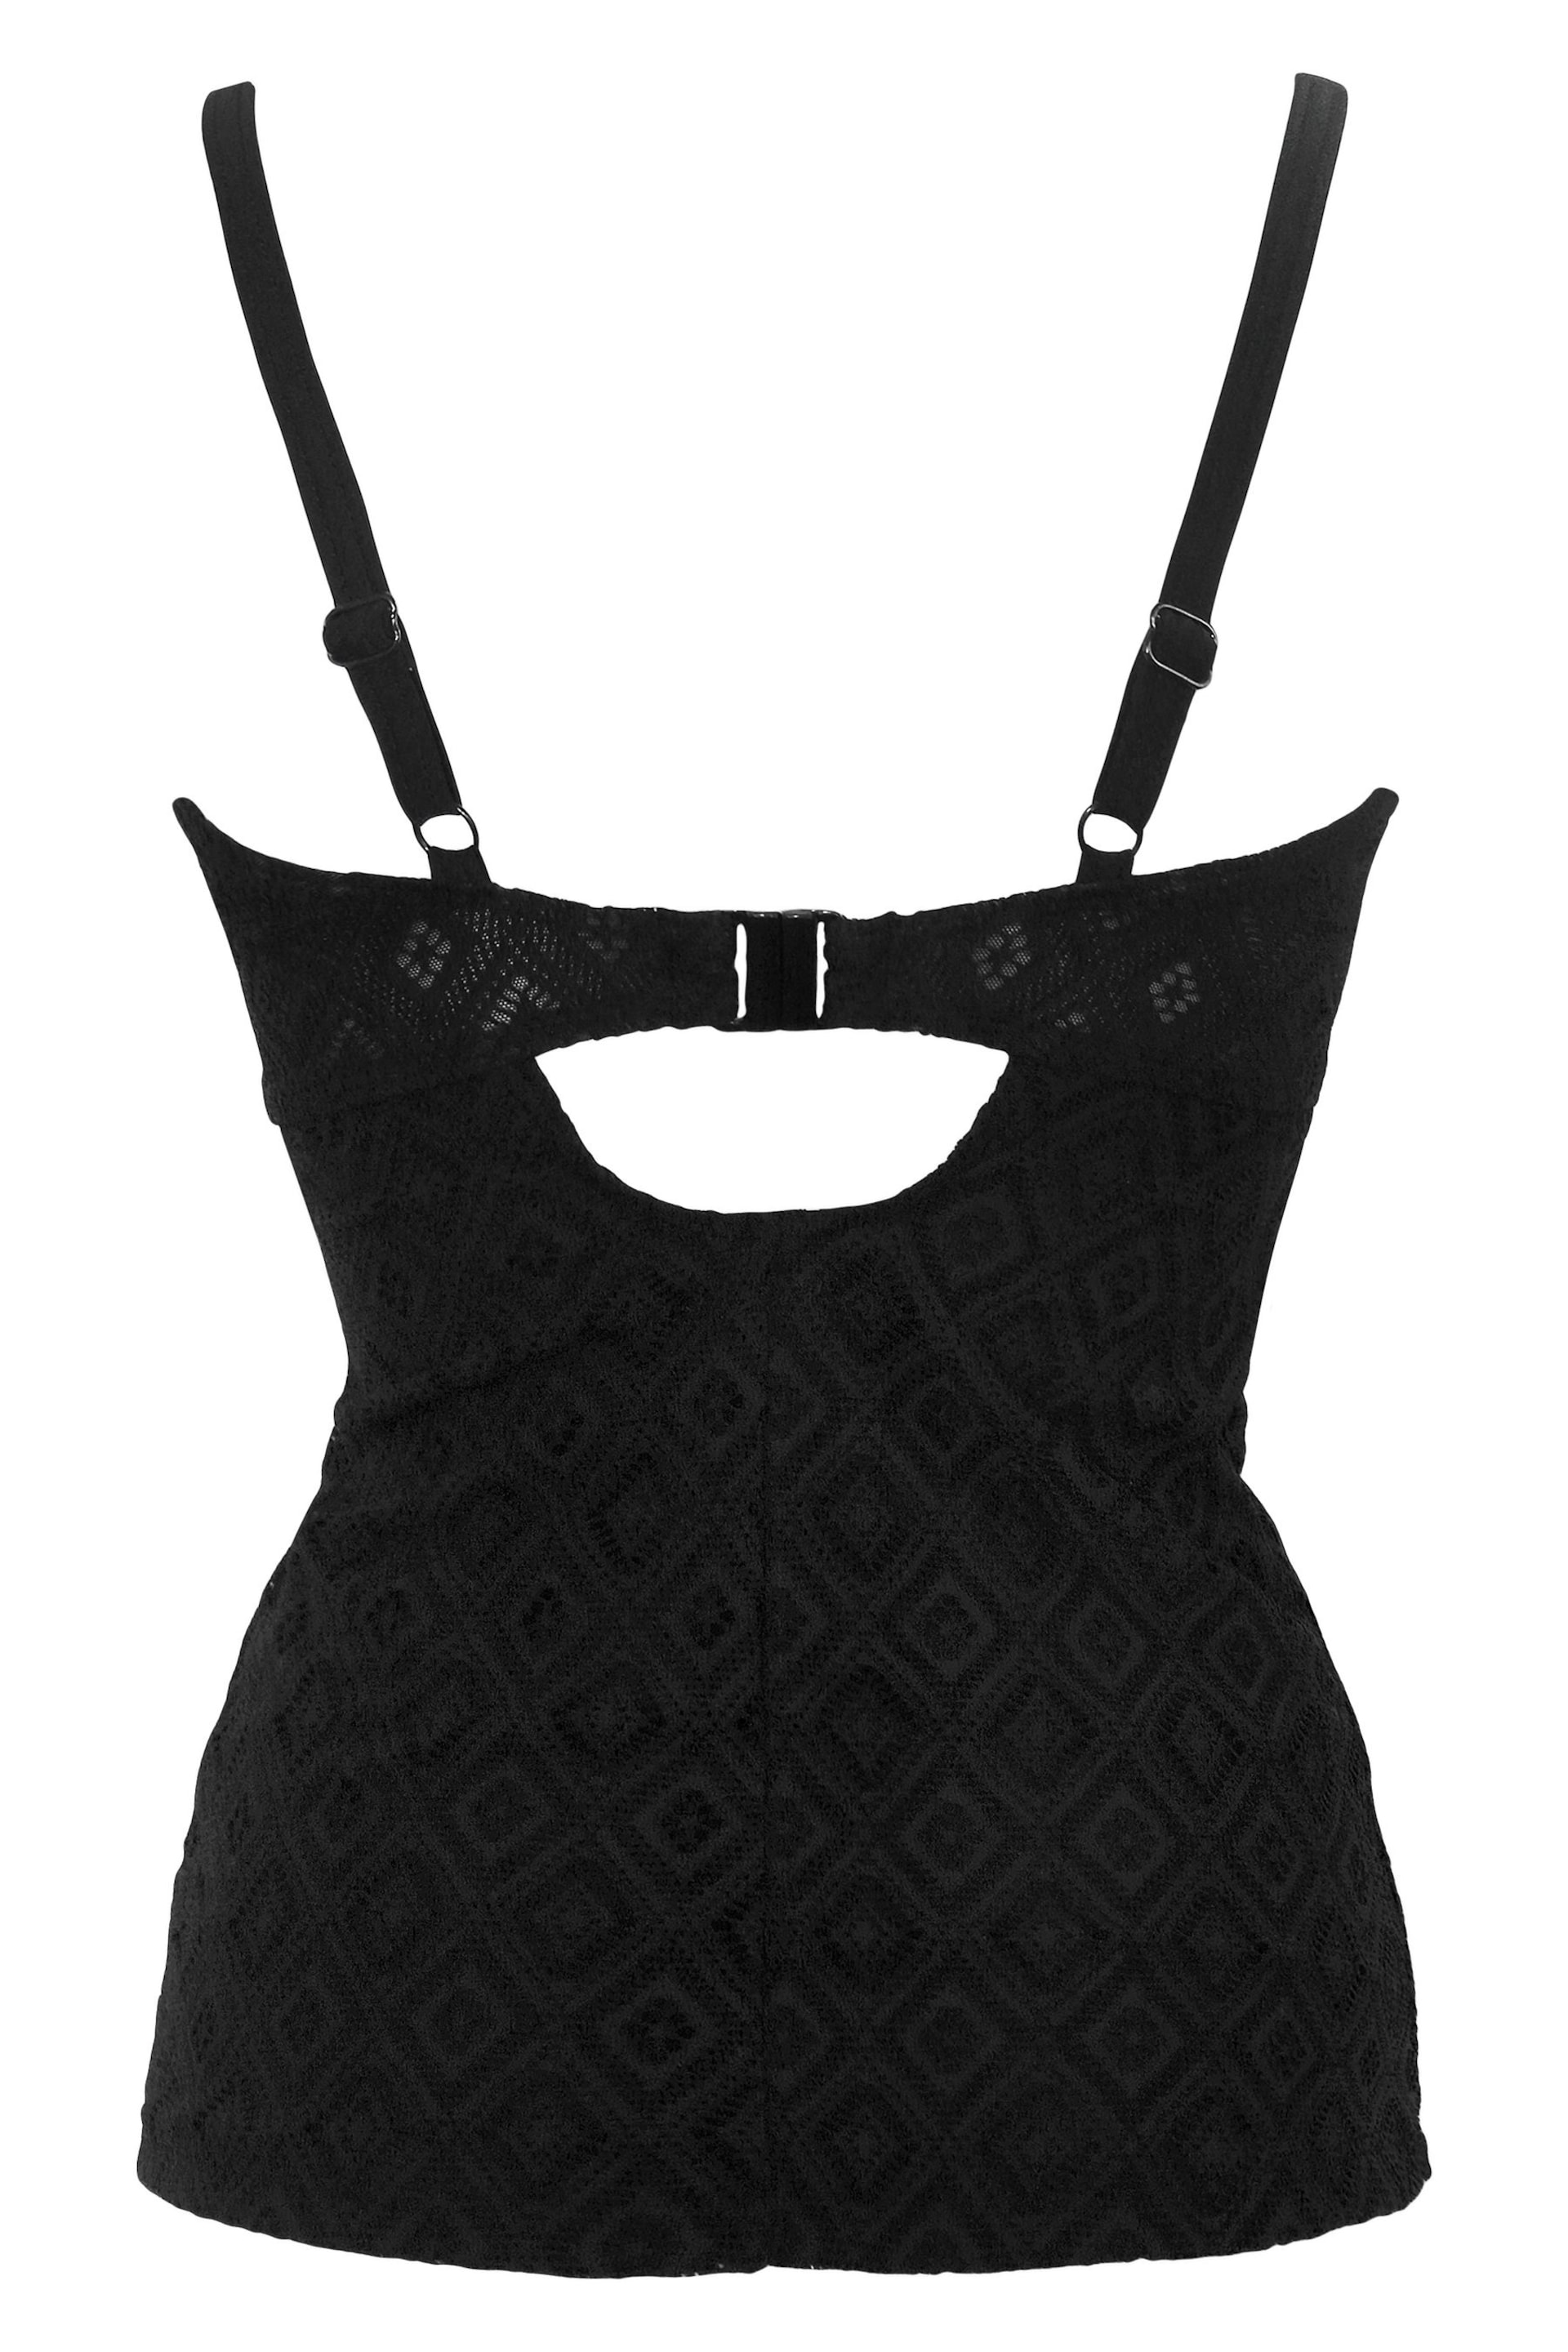 Pour Moi Black Summer Breeze Underwired Tankini - Image 5 of 5